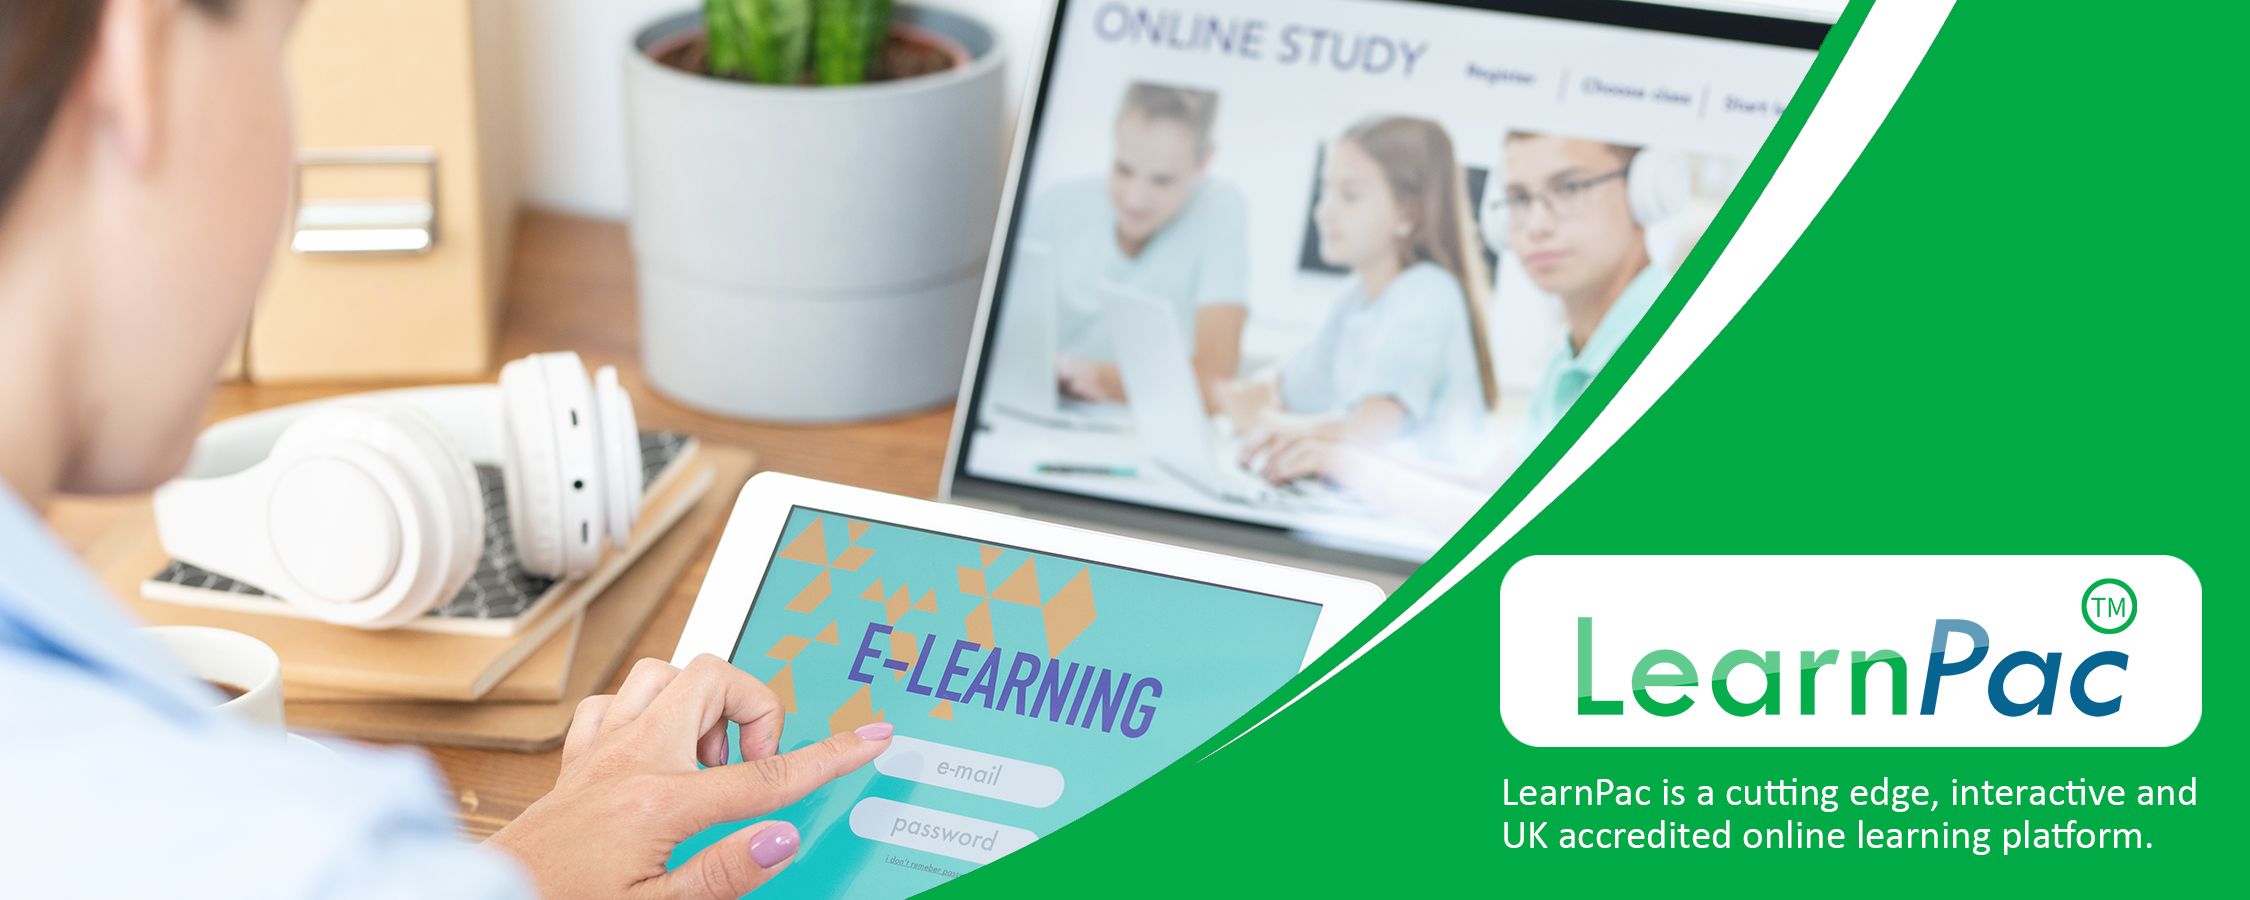 Communication in Health and Social Care - Online Learning Courses - E-Learning Courses - LearnPac Systems UK -